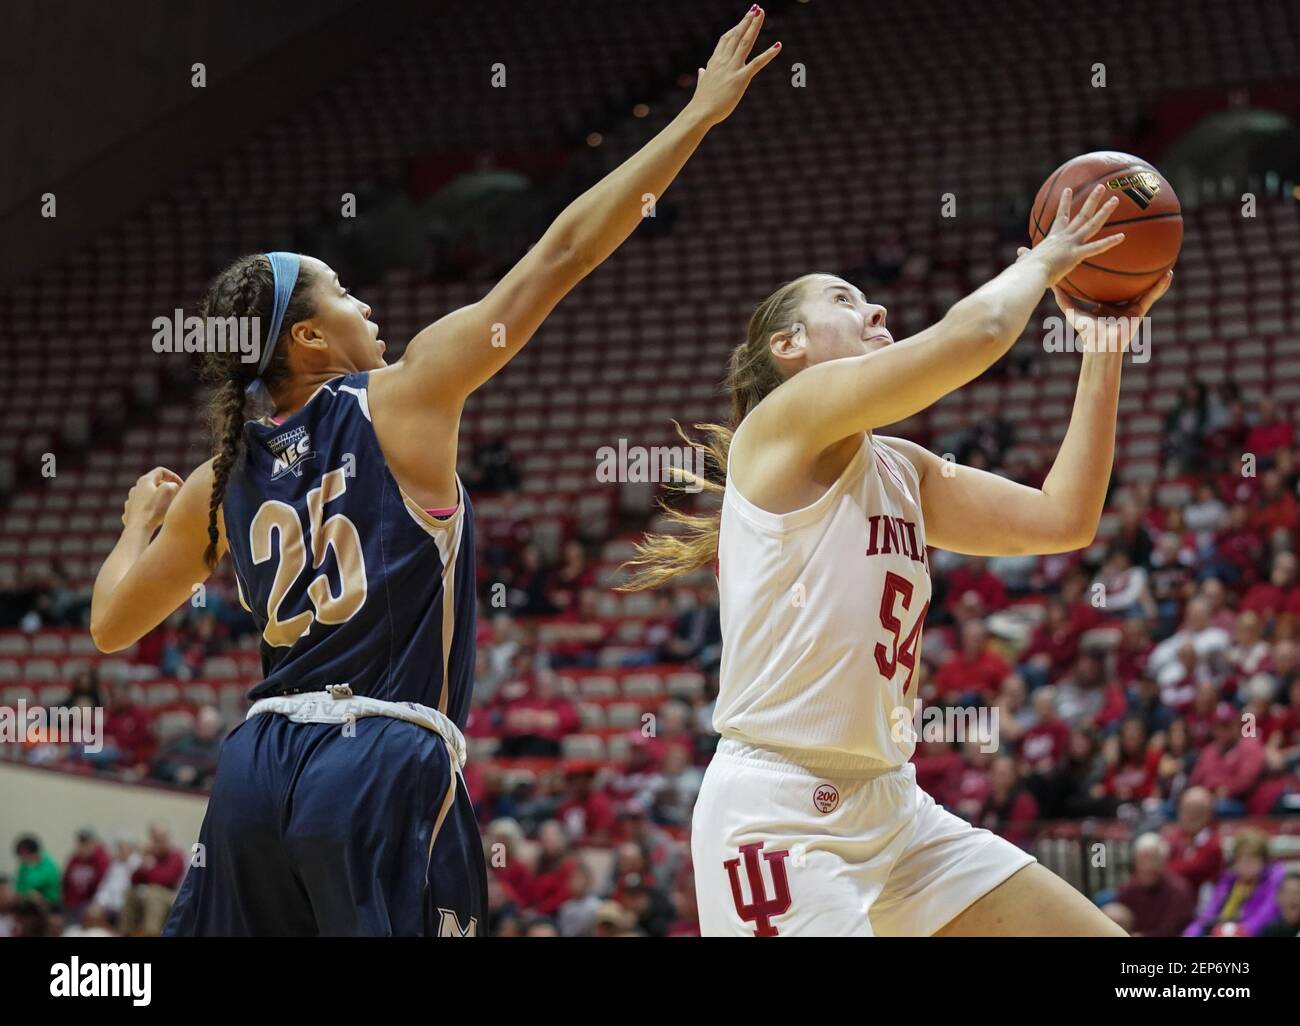 Indiana Hoosiers Mackenzie Holmes (54) plays against Taylor Addison (25)  during the NCAA Women's College Basketball game at Simon Skjodt Assembly  Hall in Bloomington. (Final Score; Indiana University 75:52 Mt. St. Mary's)  (